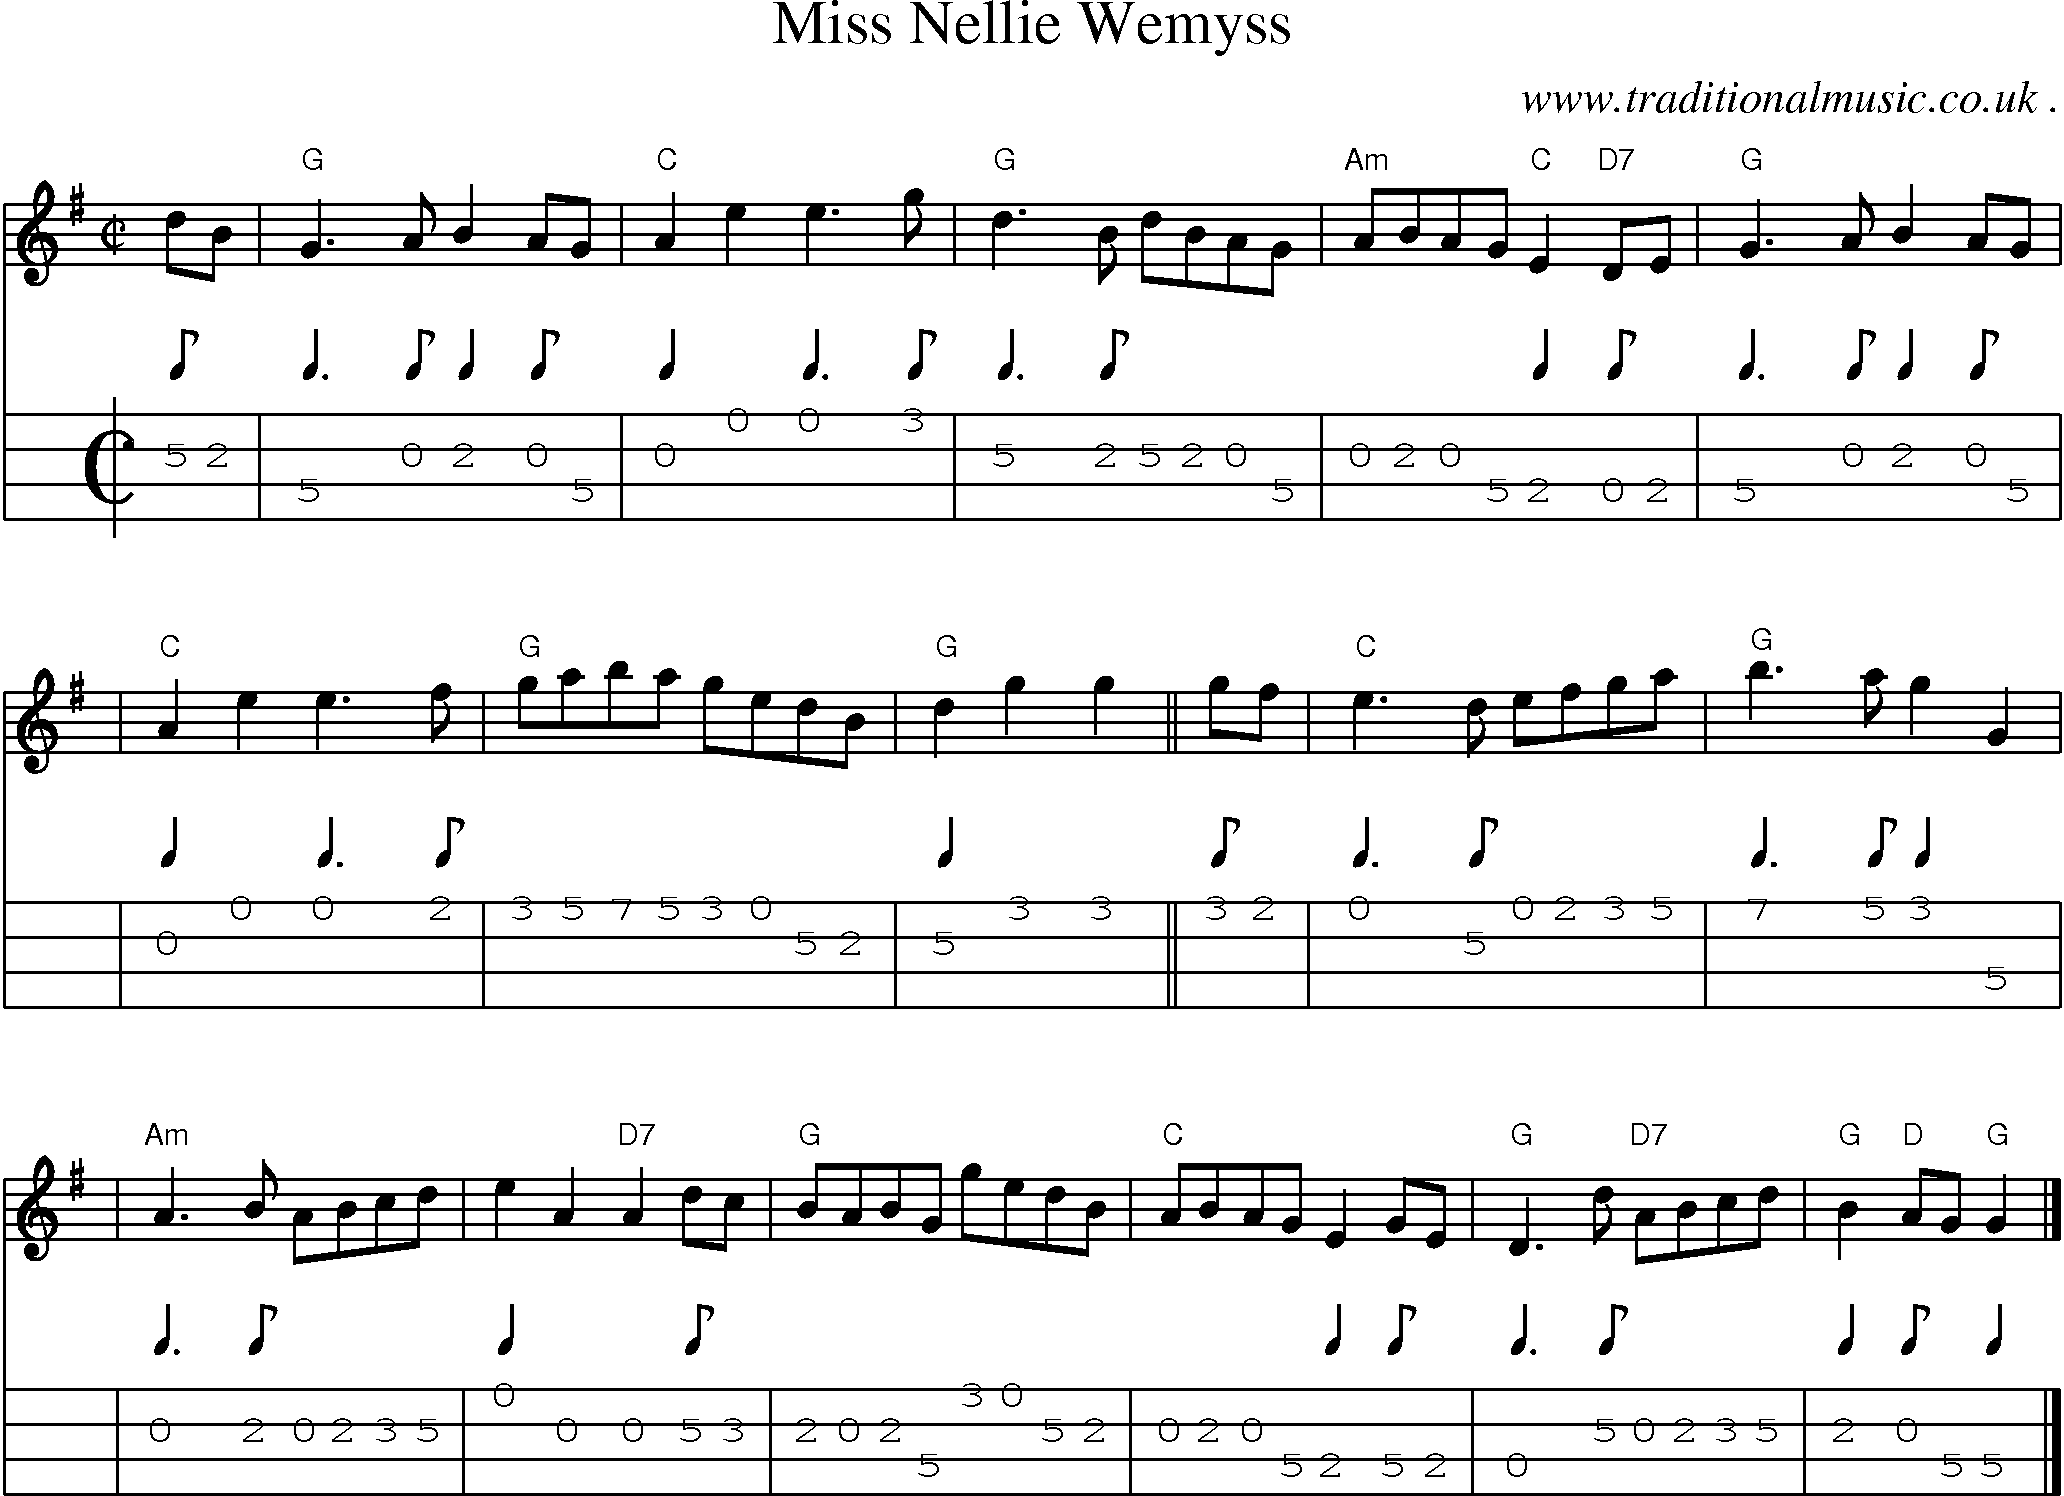 Sheet-music  score, Chords and Mandolin Tabs for Miss Nellie Wemyss